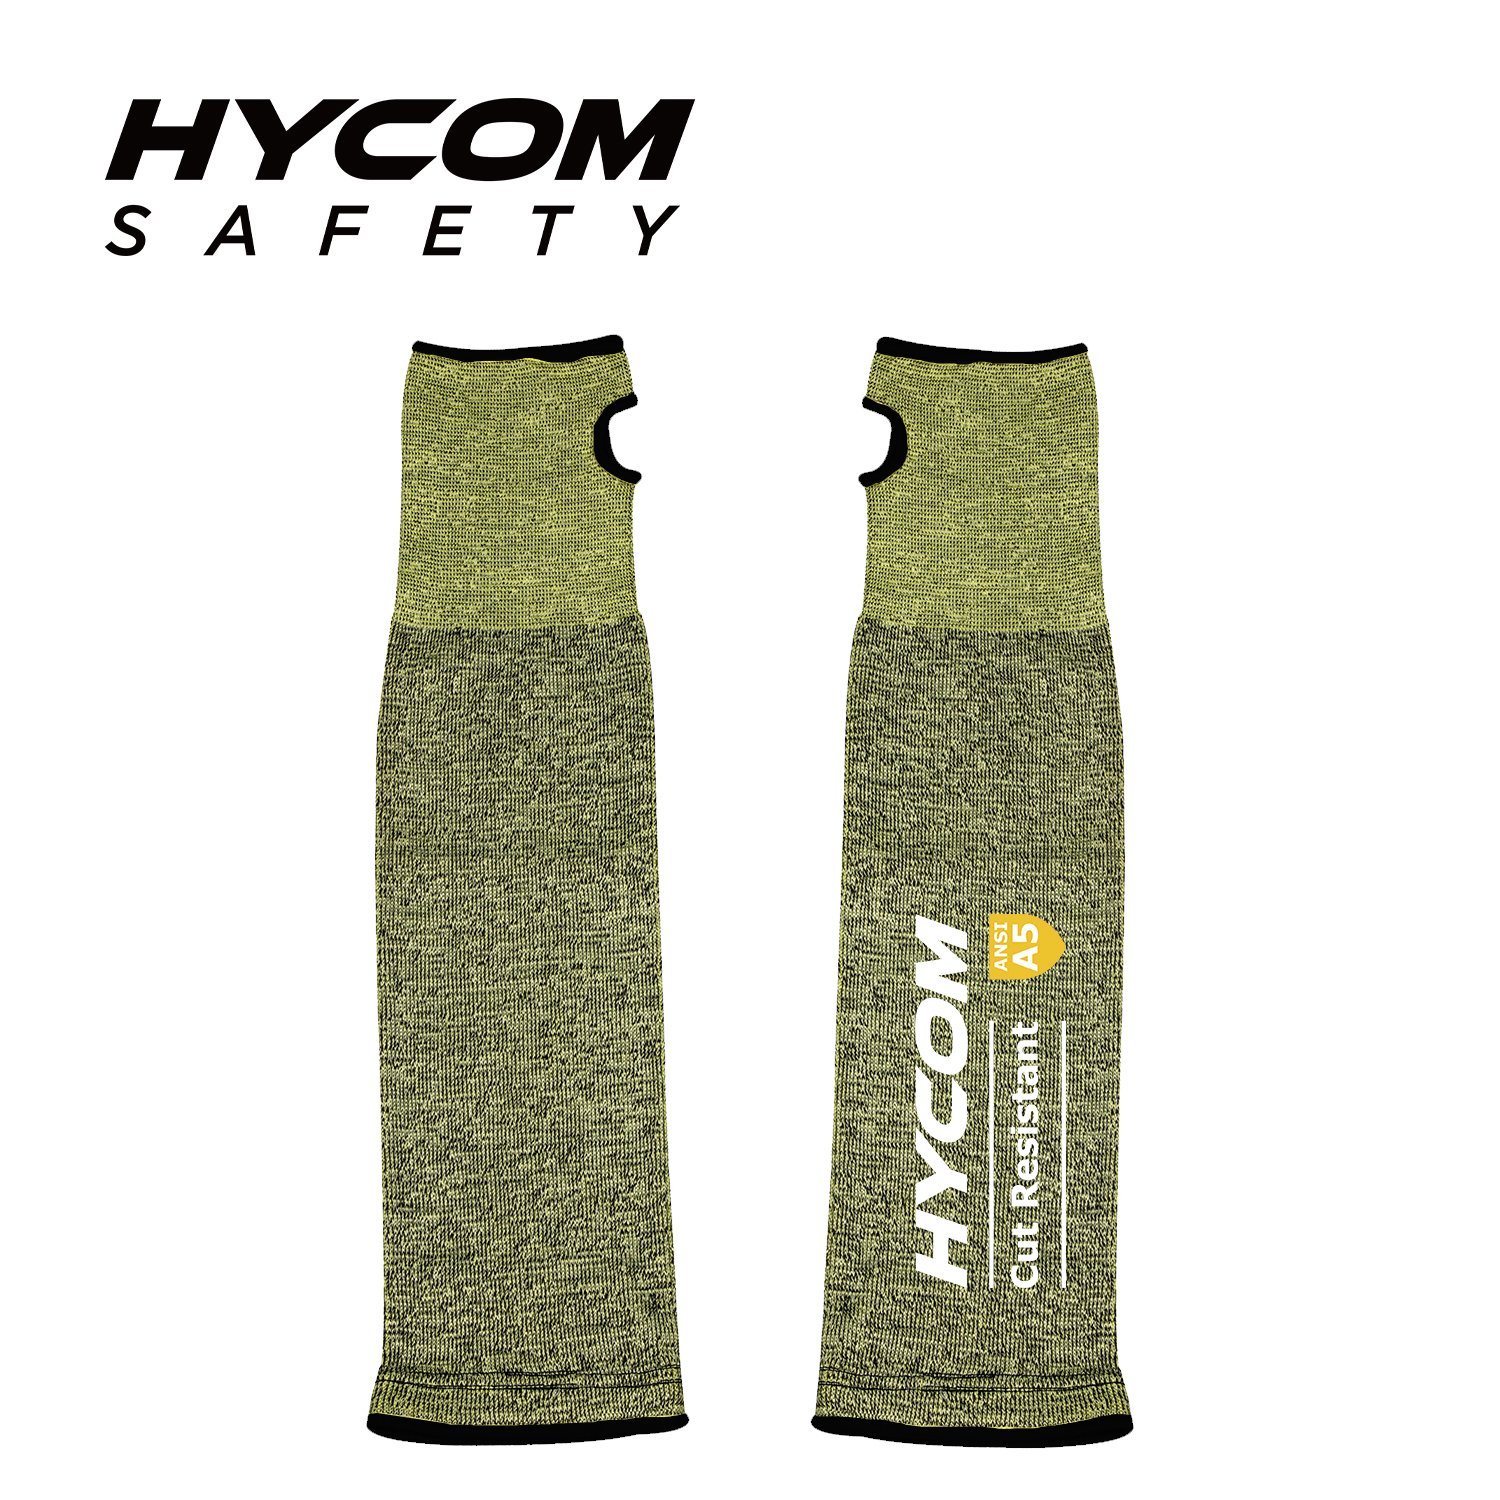 HYCOM Aramid 14 Cut Level 5 Industry Safety Cut Resistant Arm Sleeve with Thumb Slot 